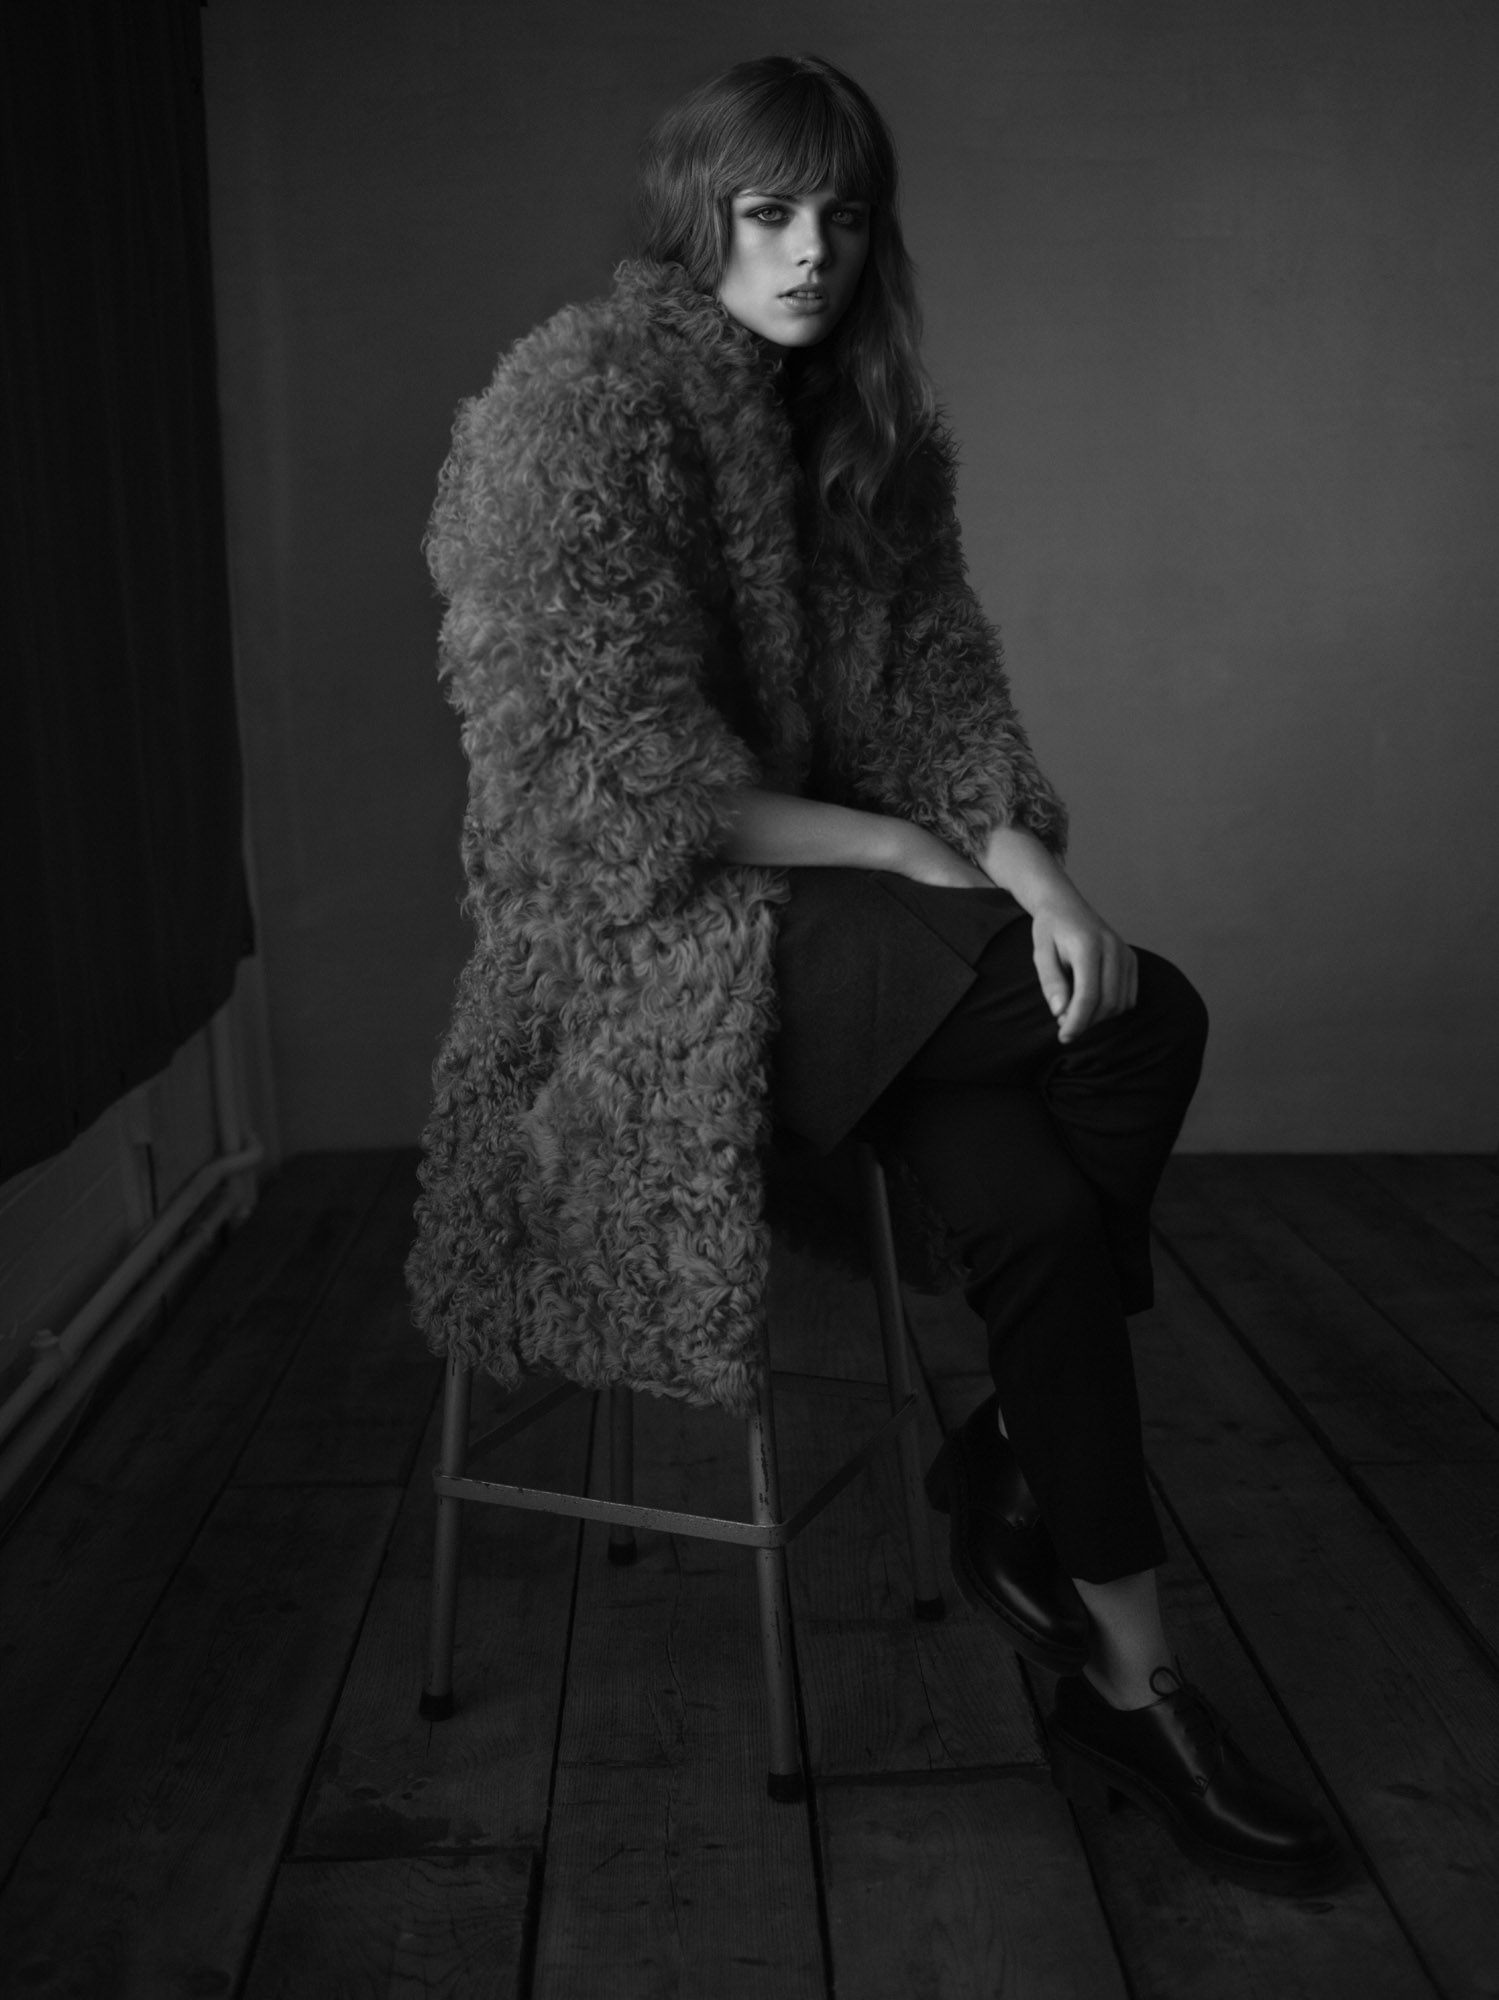 An Other Magazine AW 2012 Ph Scott Trindle 4